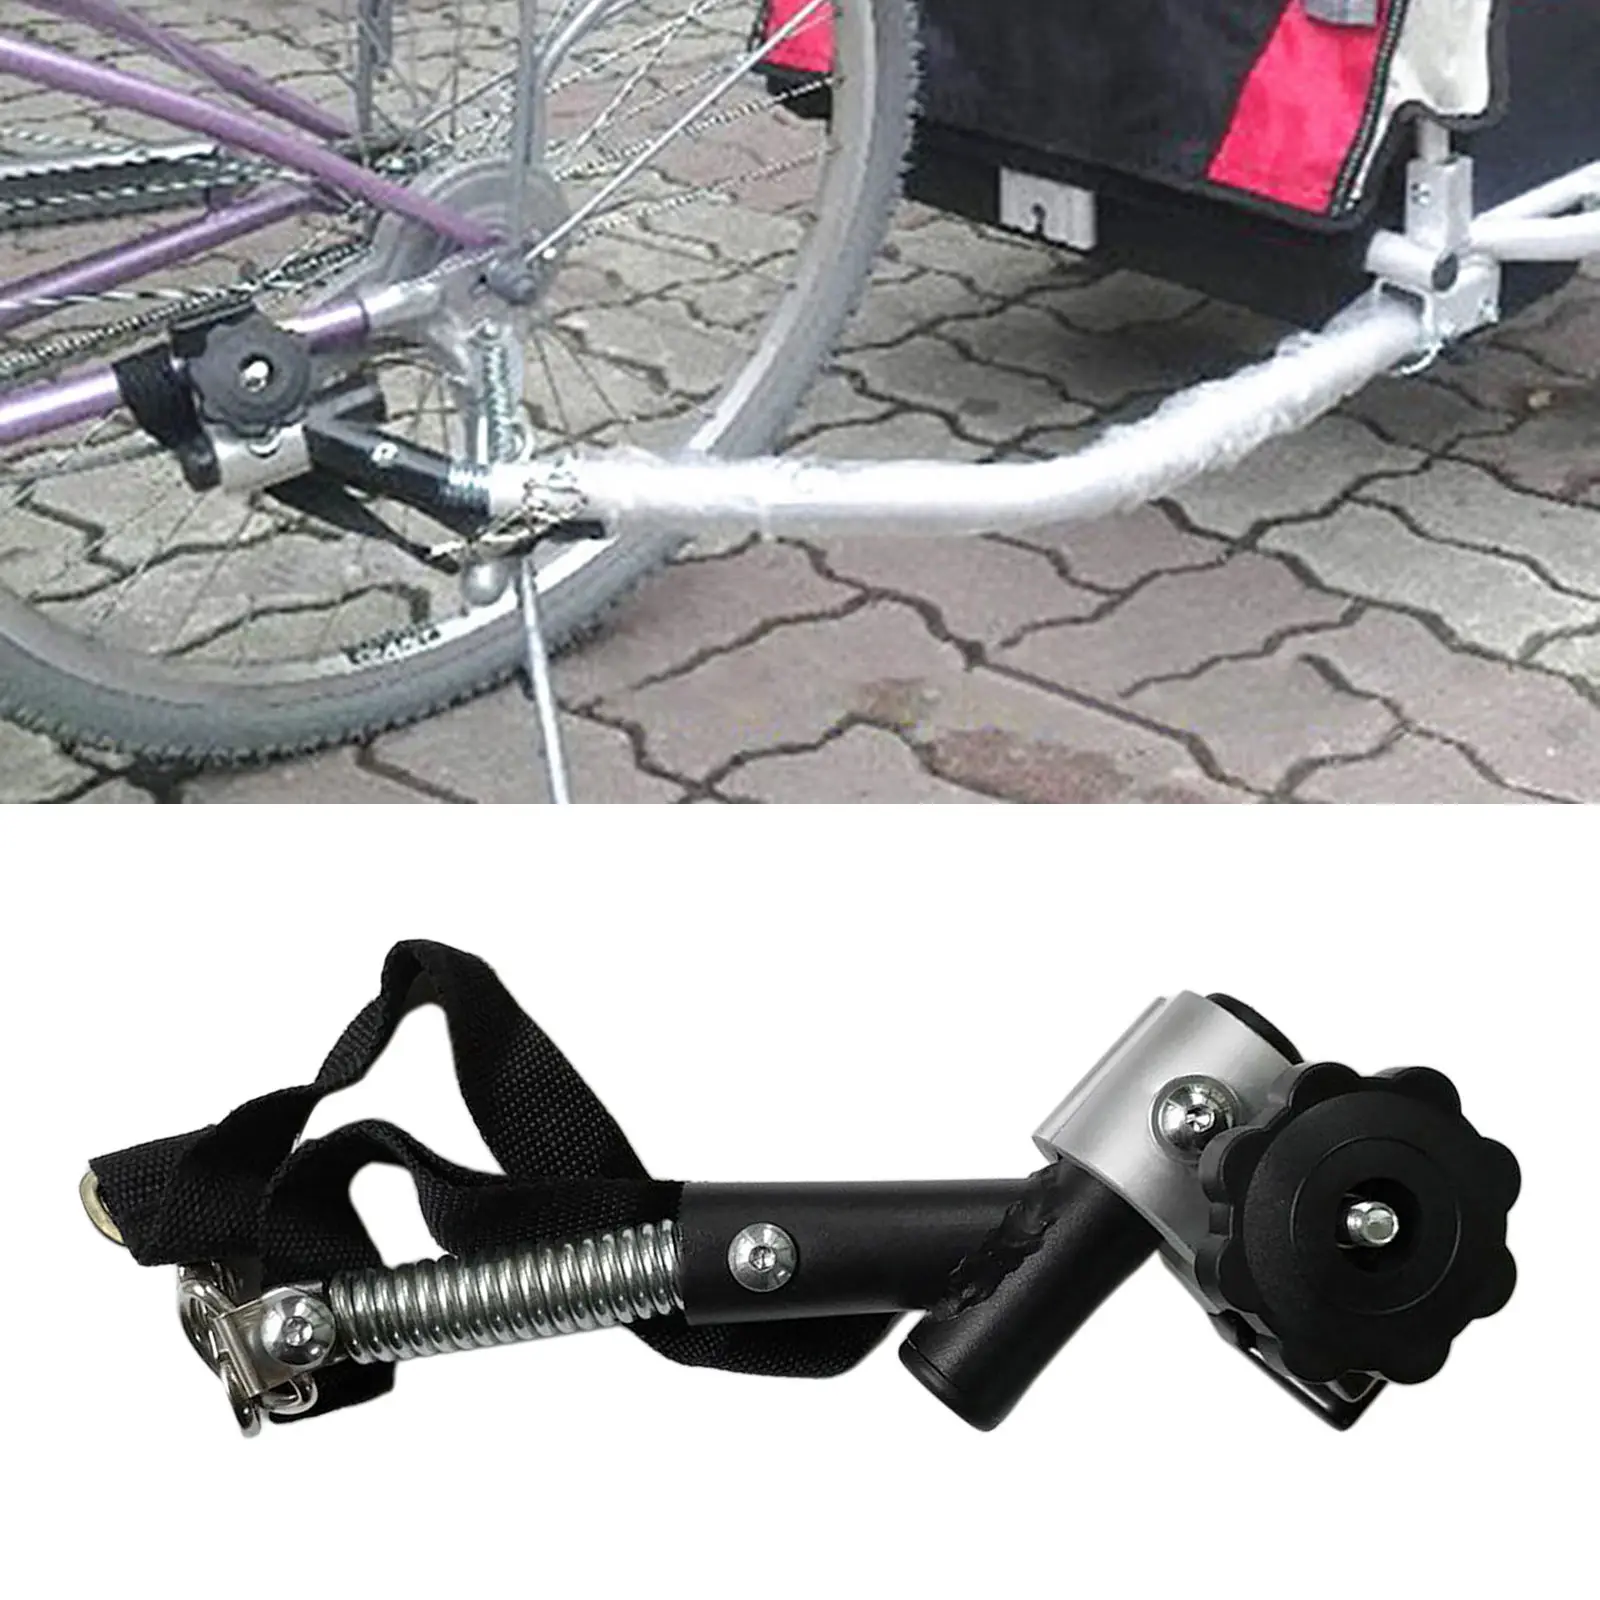 Liveday Universal Bike Trailer Bike Trailer Connector Hitch Baby Pet Hitch Linker Connector Bicycle Rear Rack Accessories 